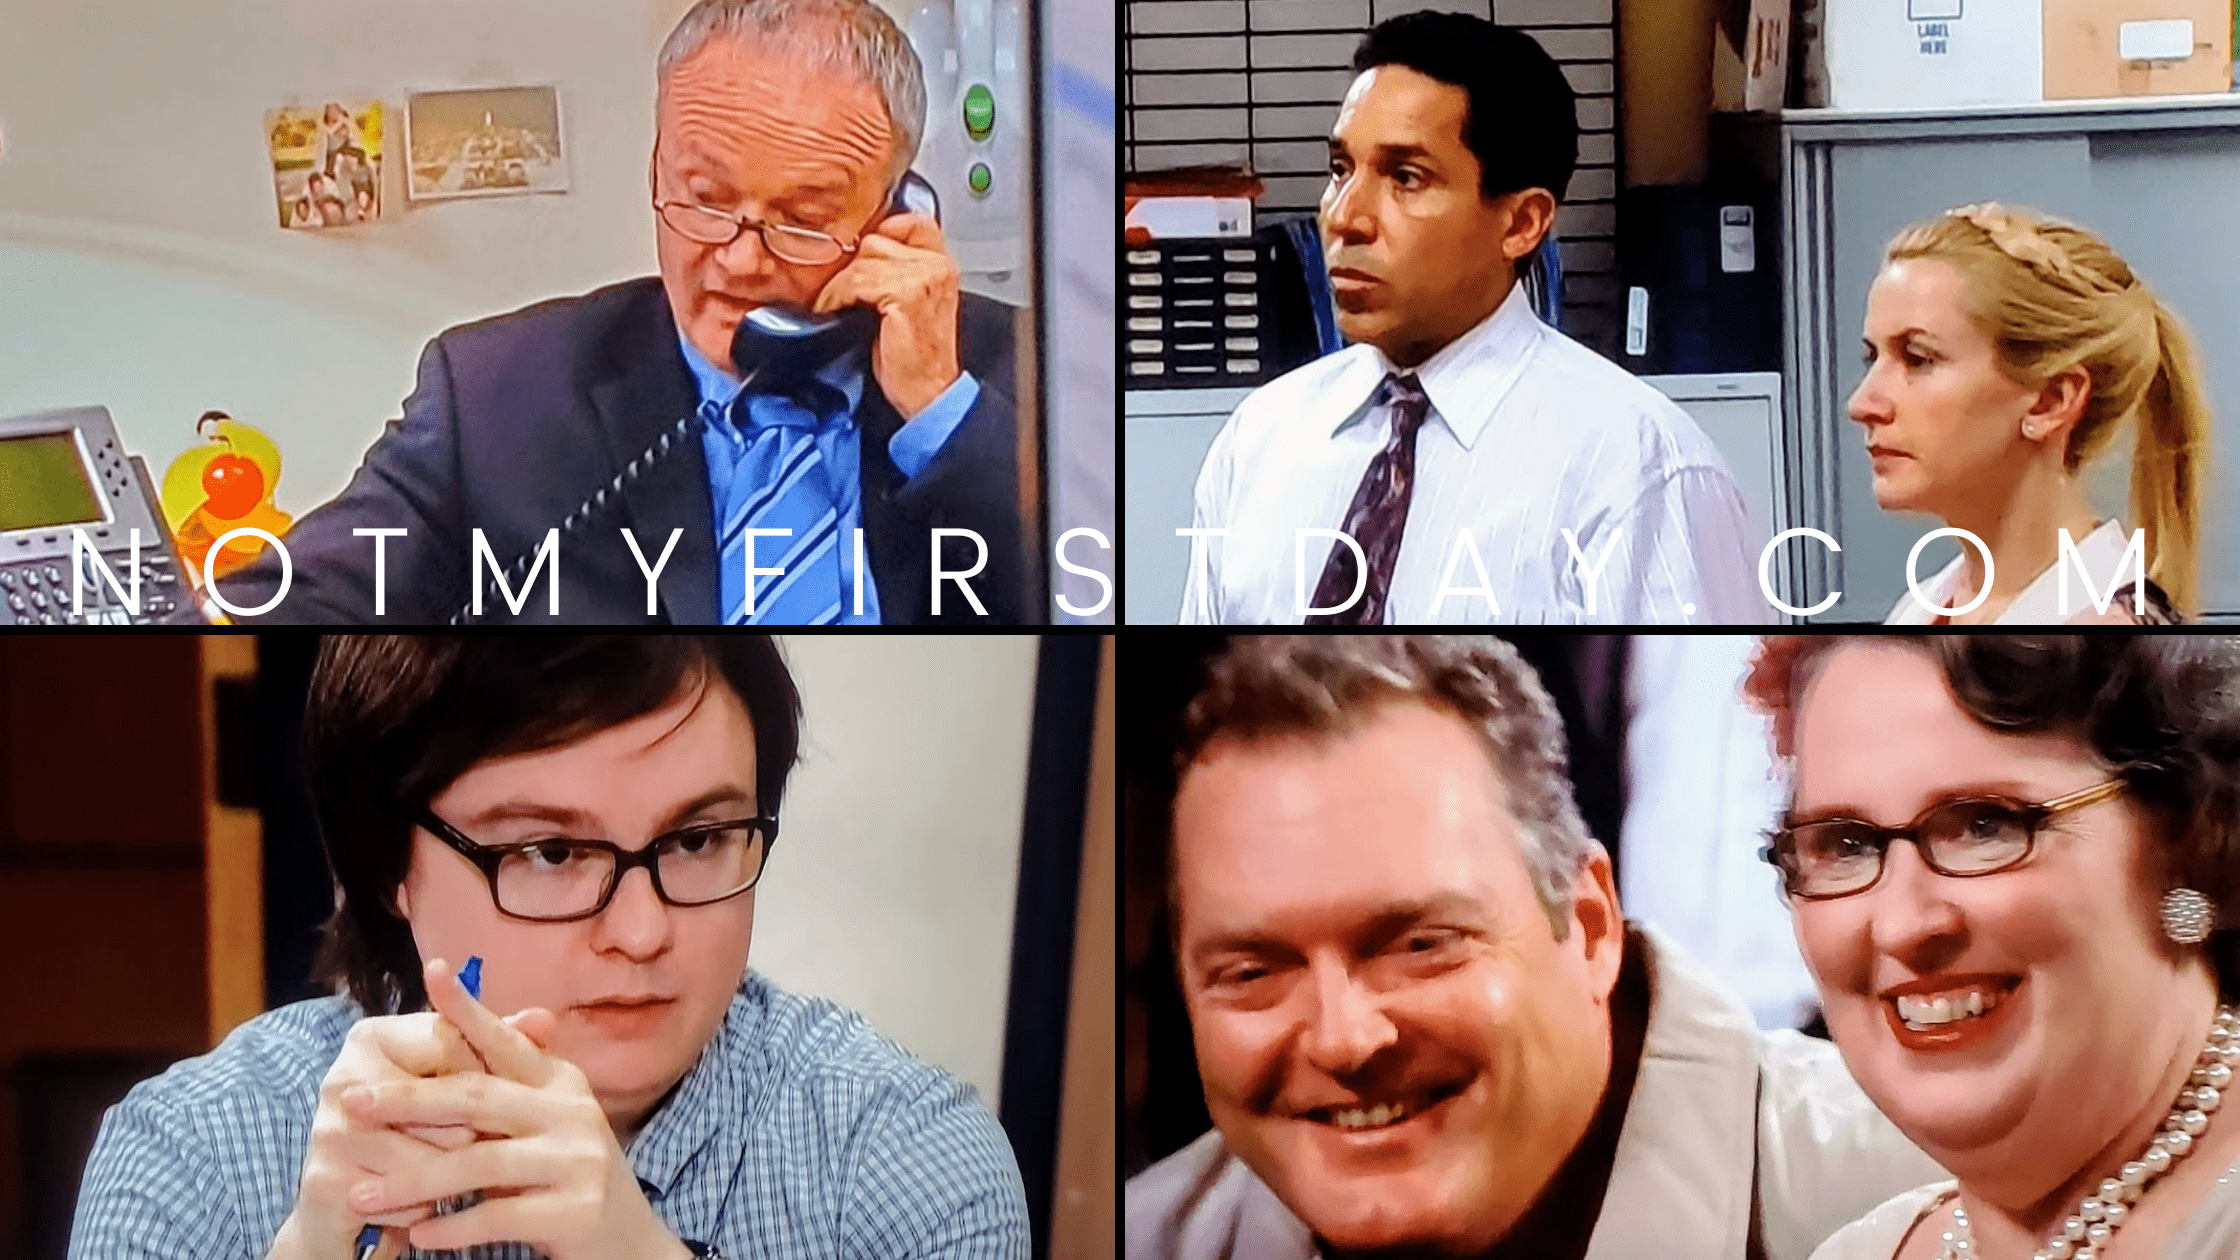 Using Real Names on The Office